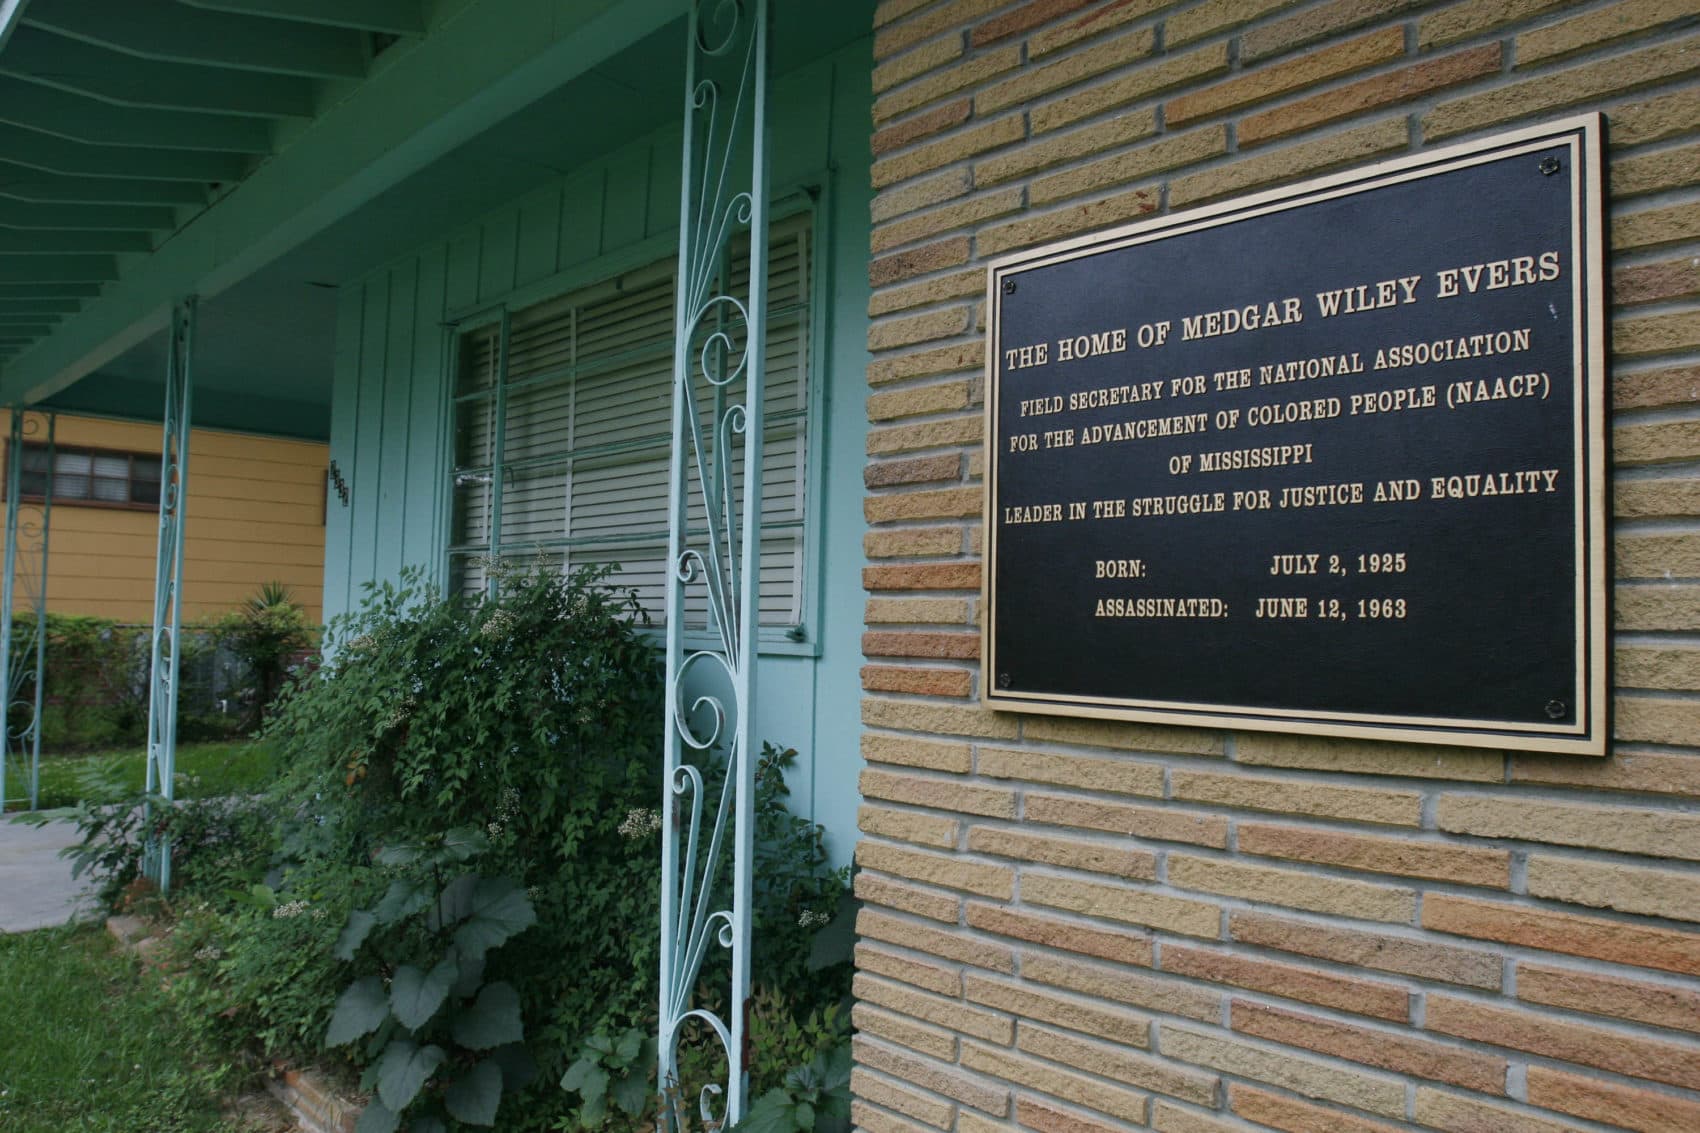 A plaque decorates the front of the home of the late civil rights activist Medgar Evers in Jackson, Miss. (Rogelio V. Solis/AP)